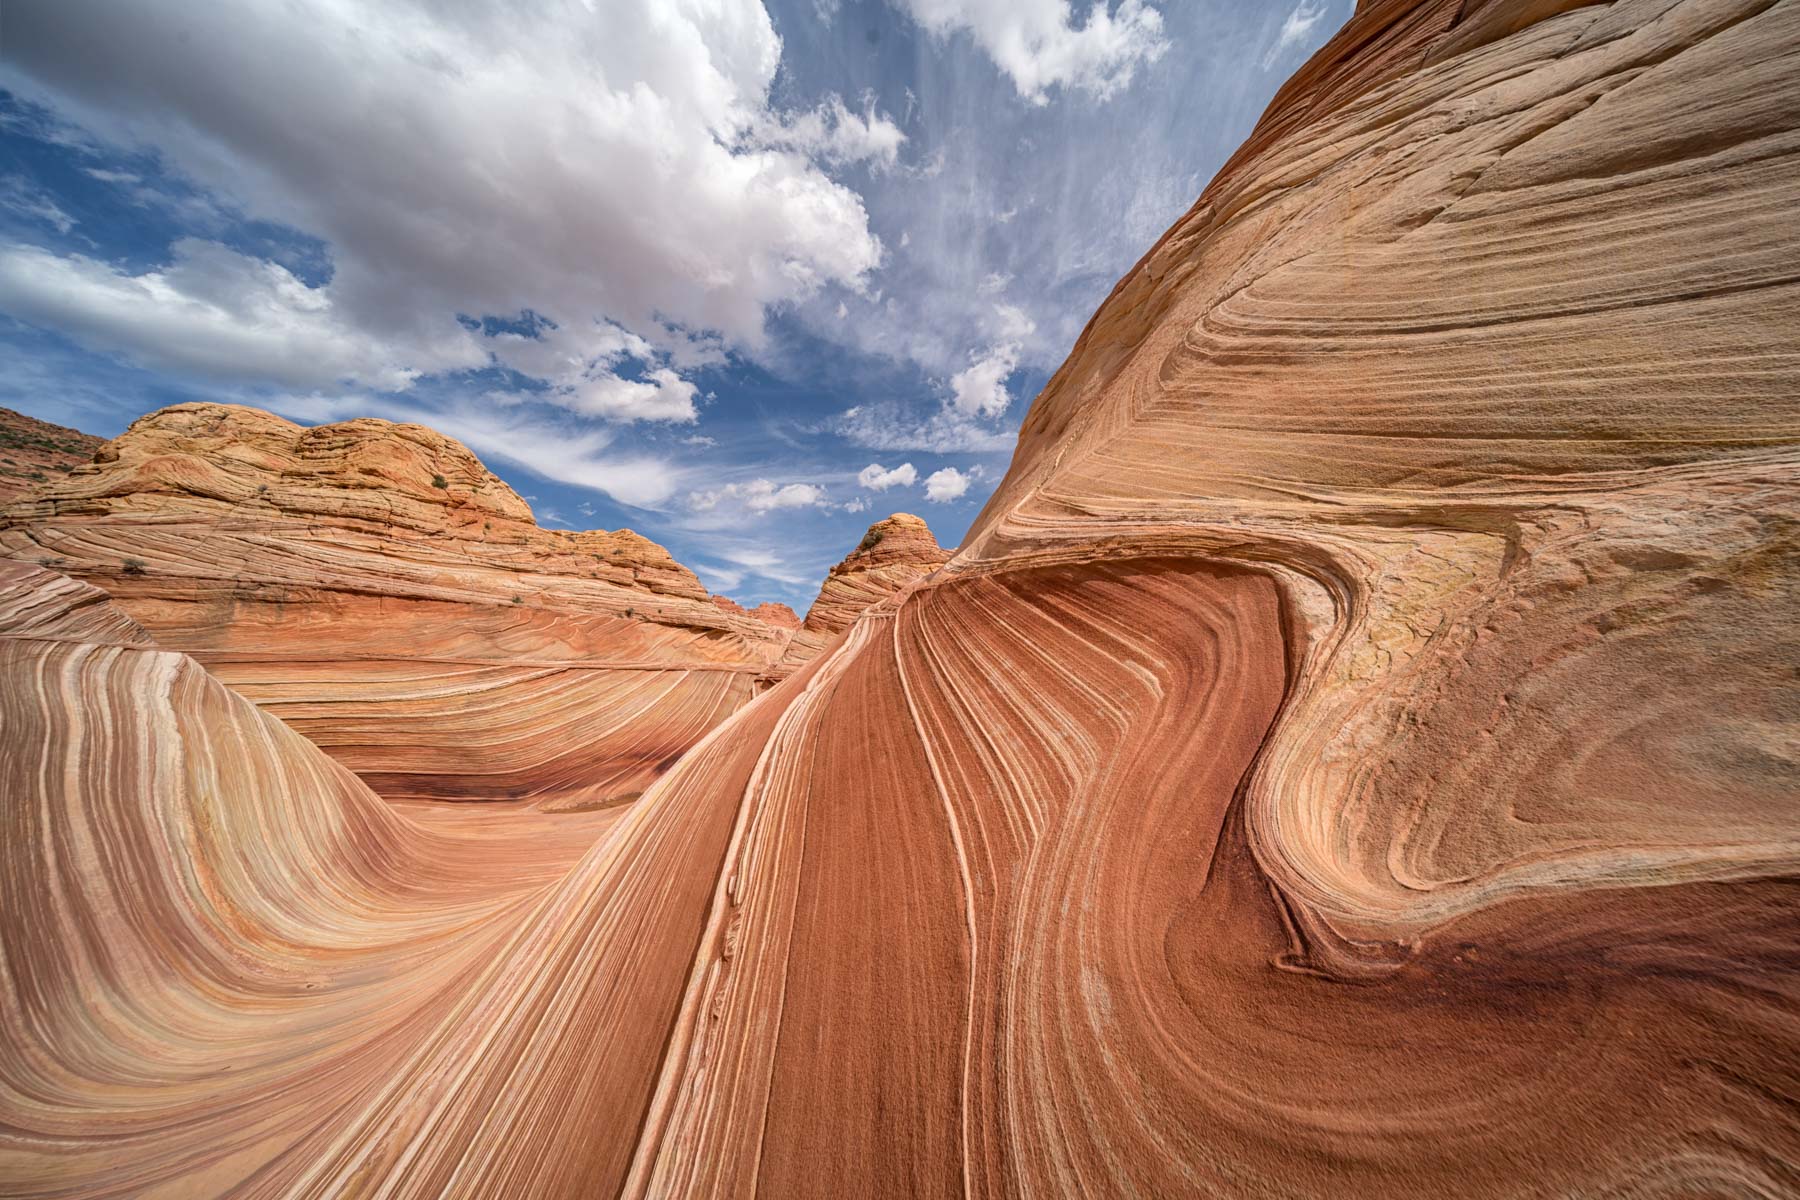 Classic view of The Wave rock formation in Arizona shot at 10mm